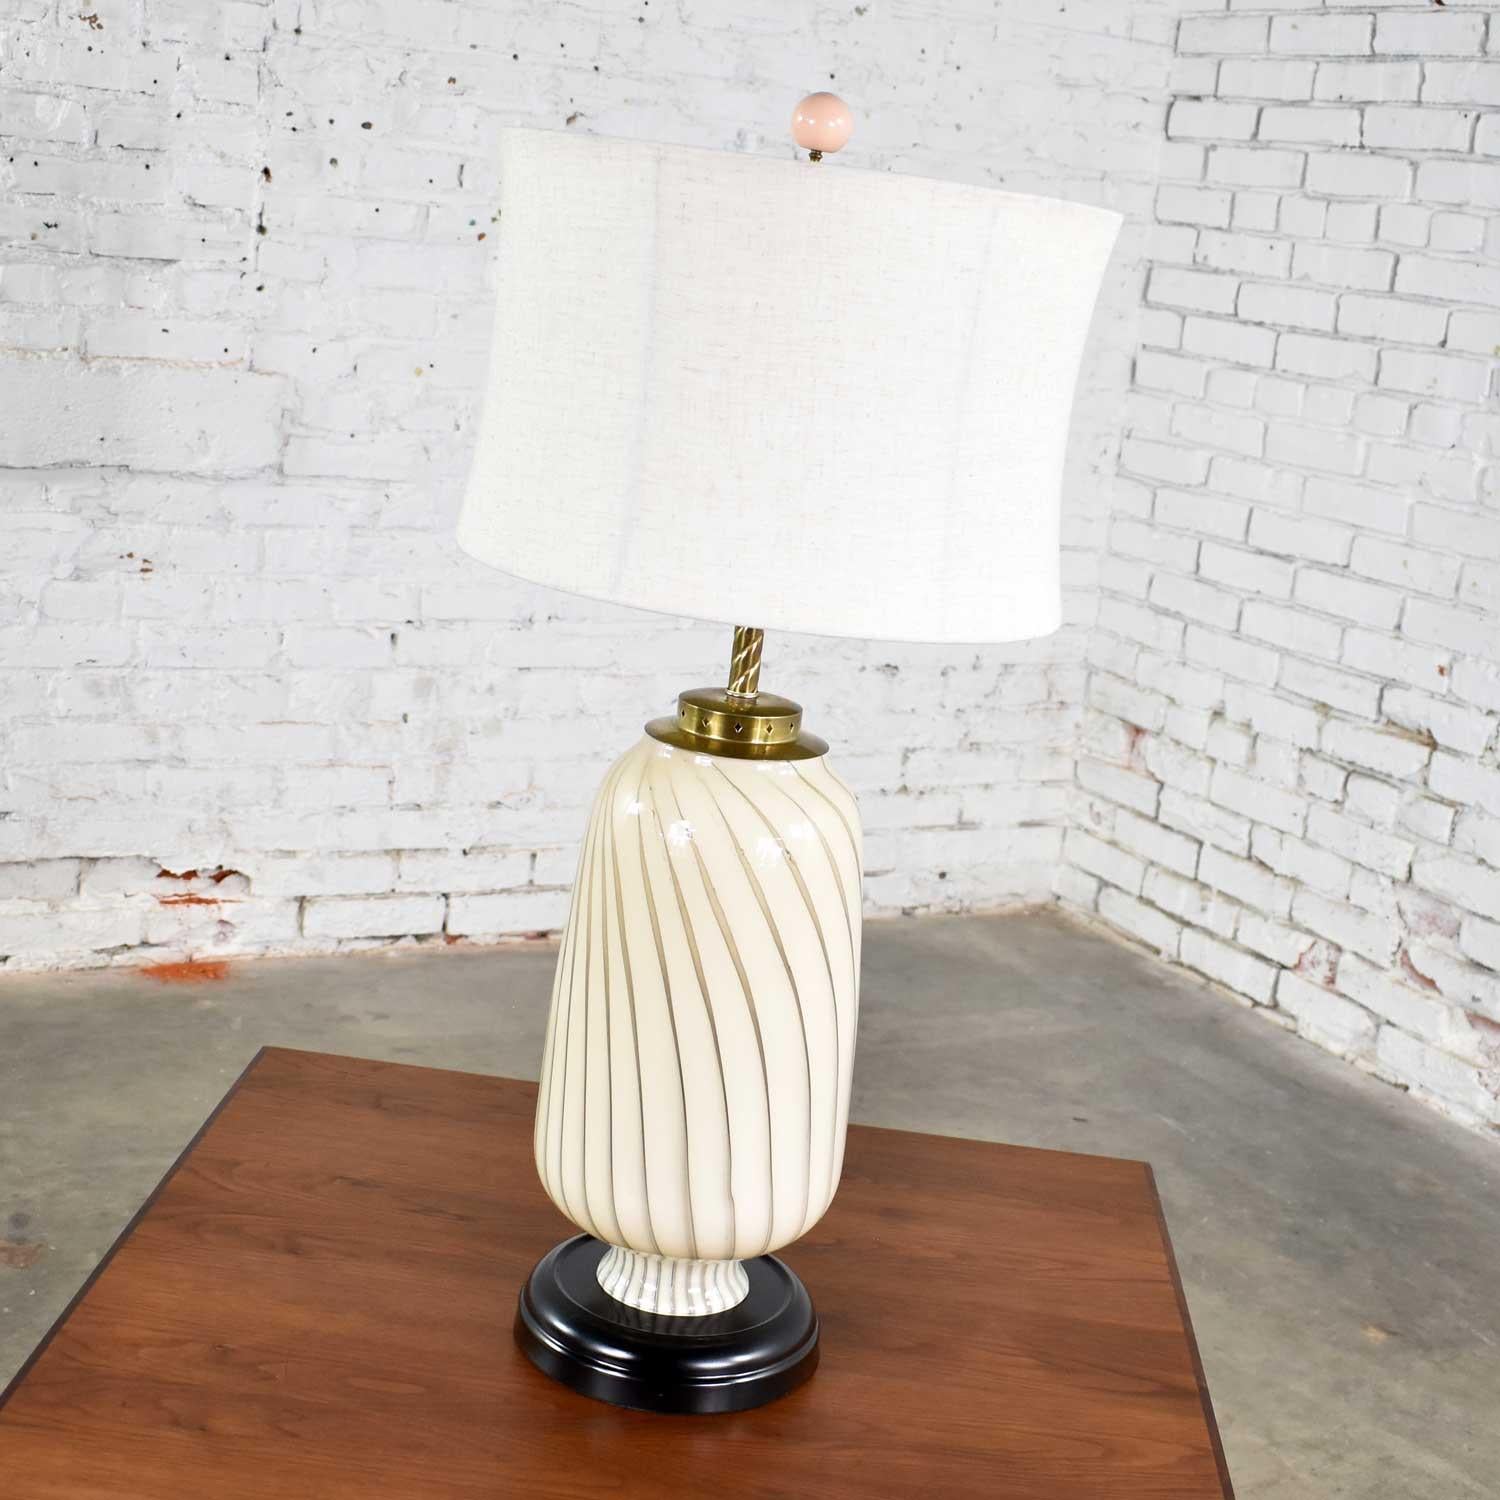 Beautiful Mid-Century Modern Murano style blown glass table lamp in cream and taupe with black and brass accents. It is in fabulous vintage condition wearing a new fabric shade and having a fresh coat of black paint on its base. Please see photos,